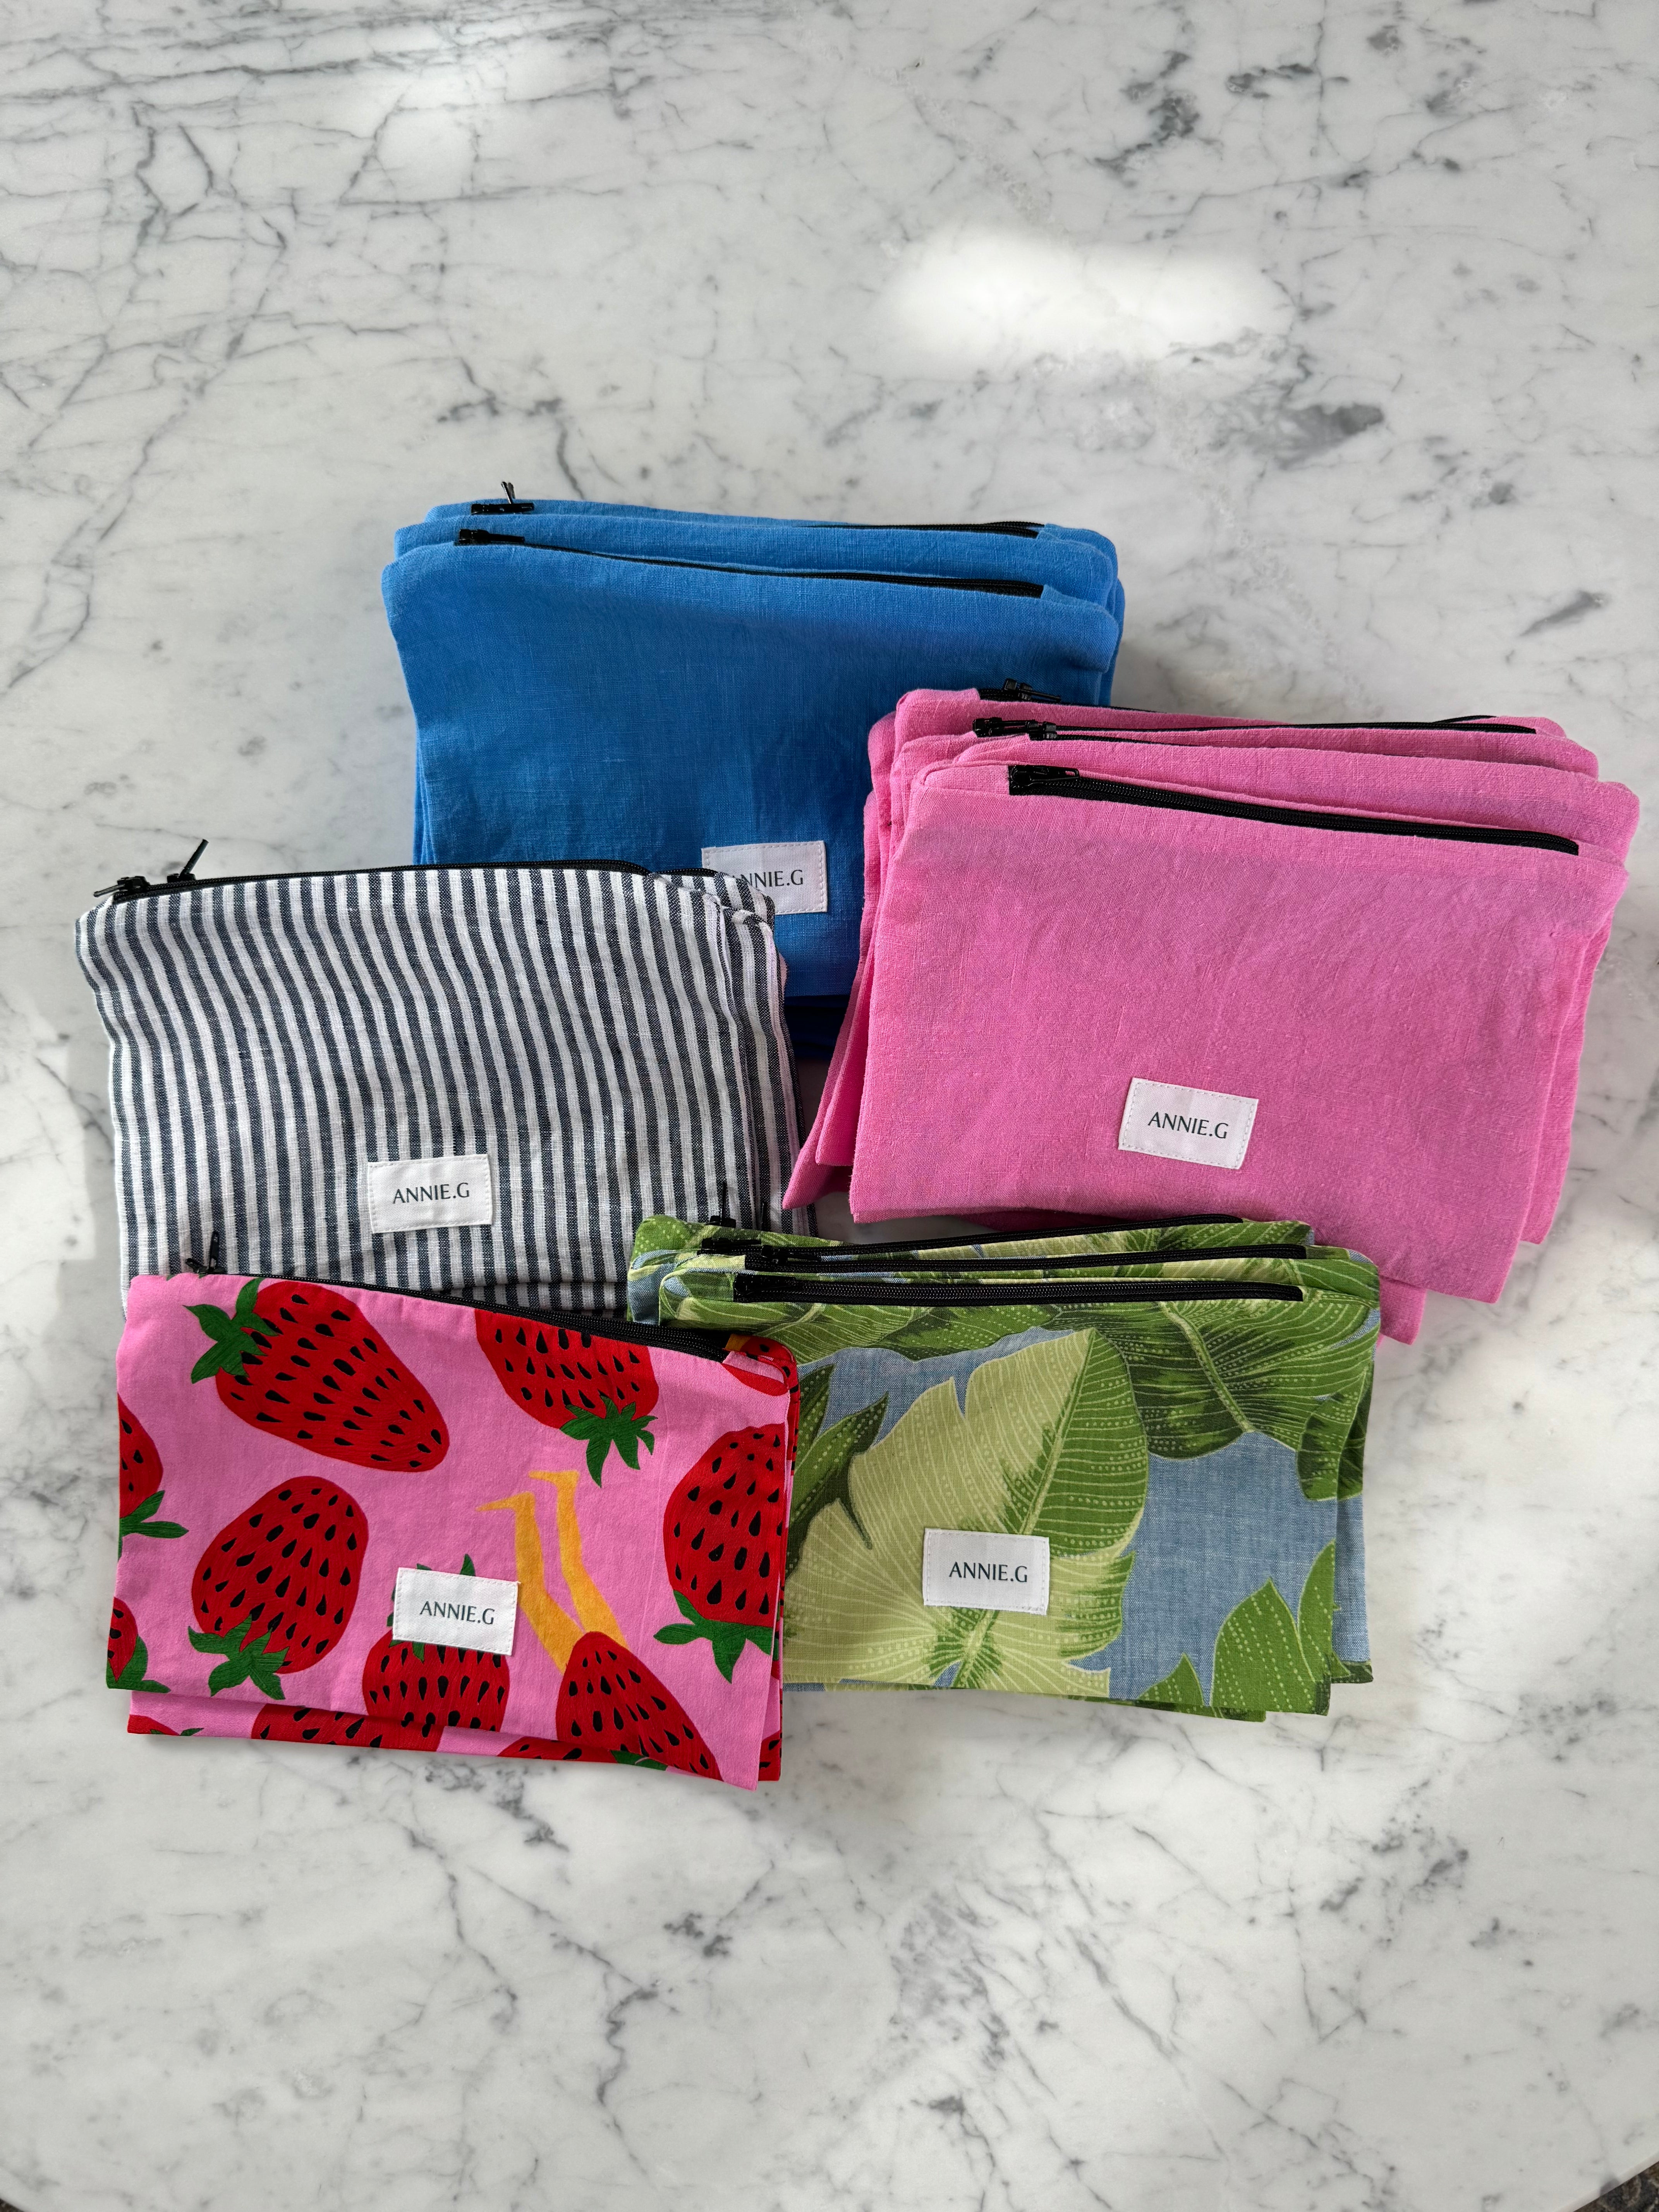 ZIPPER-POUCH-LYING-IN-A-GROUP-ON-TABLE-SWEET-LEGS-QLD-NAVY-STRIPE-BLUE-PINK-COLOURS